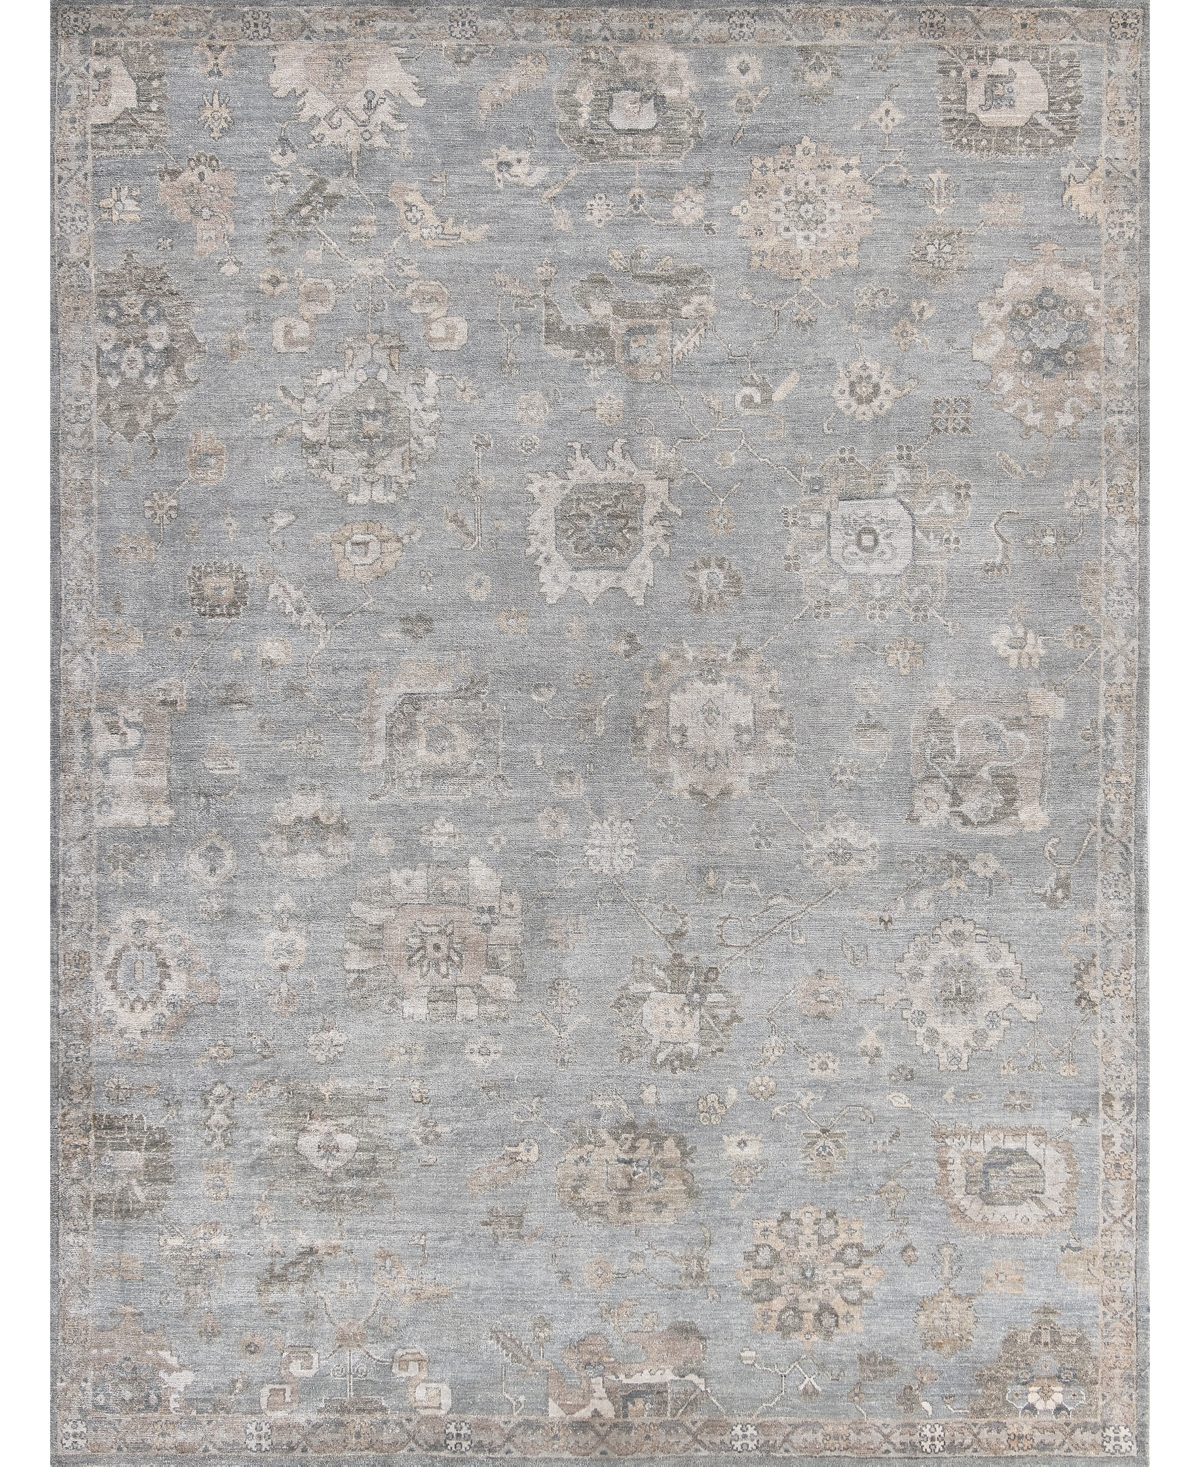 Exquisite Rugs Museum TRS4492 9' x 12' Area Rug - Blue, Gray